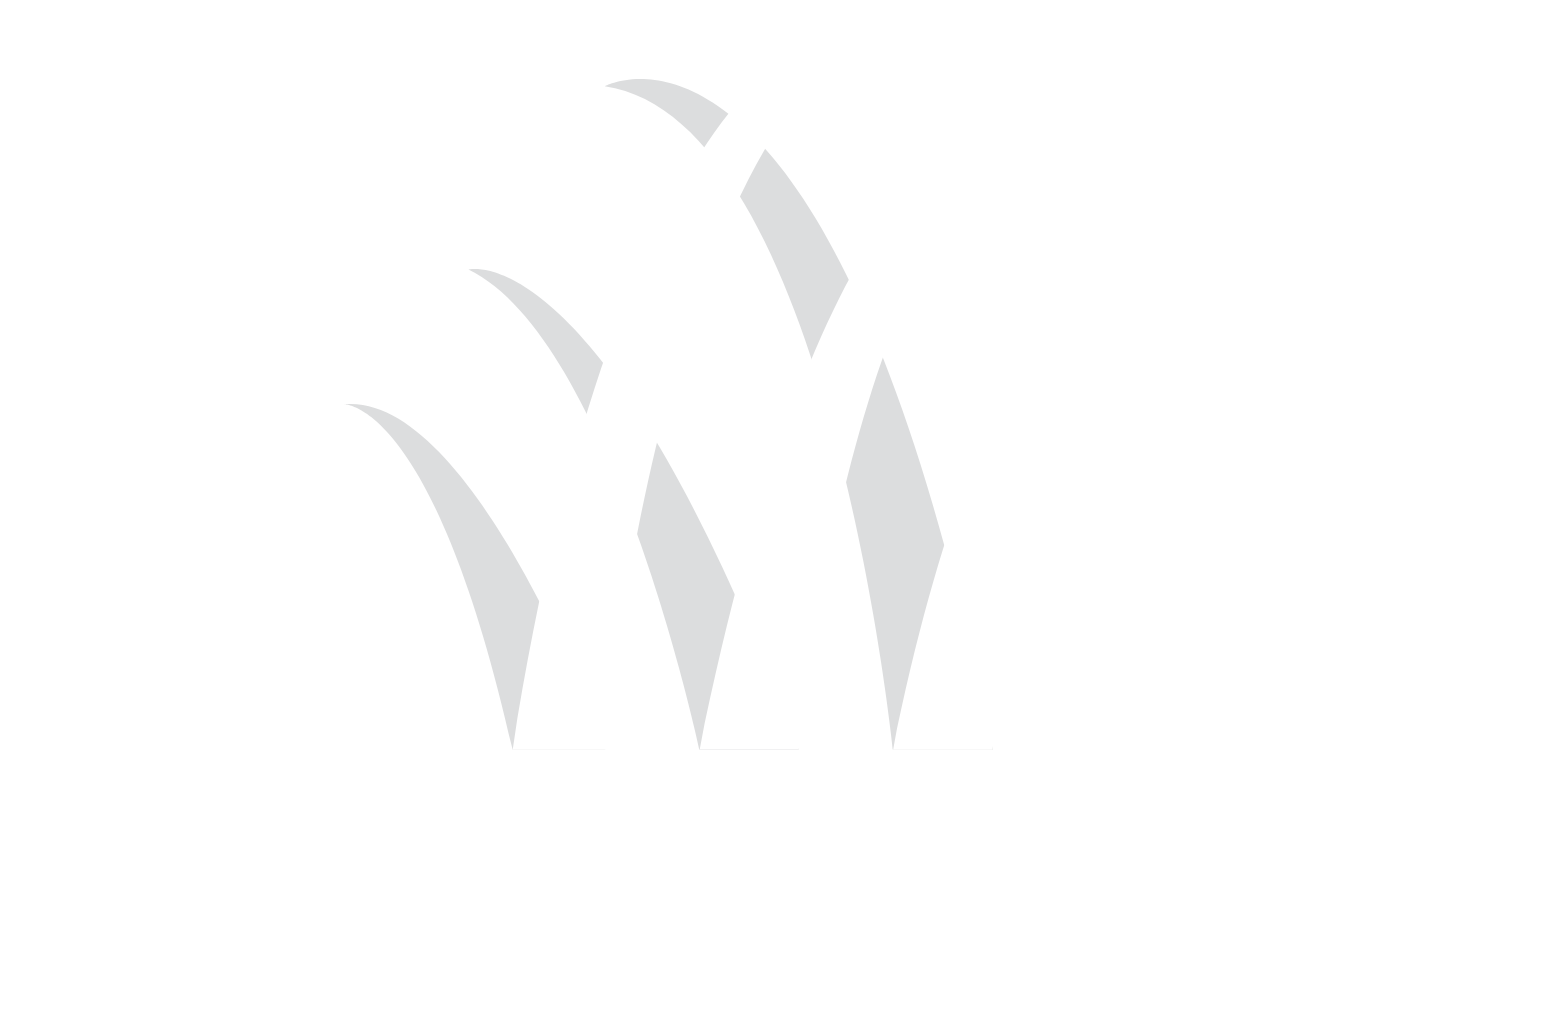 National Company for Learning and Education logo large for dark backgrounds (transparent PNG)